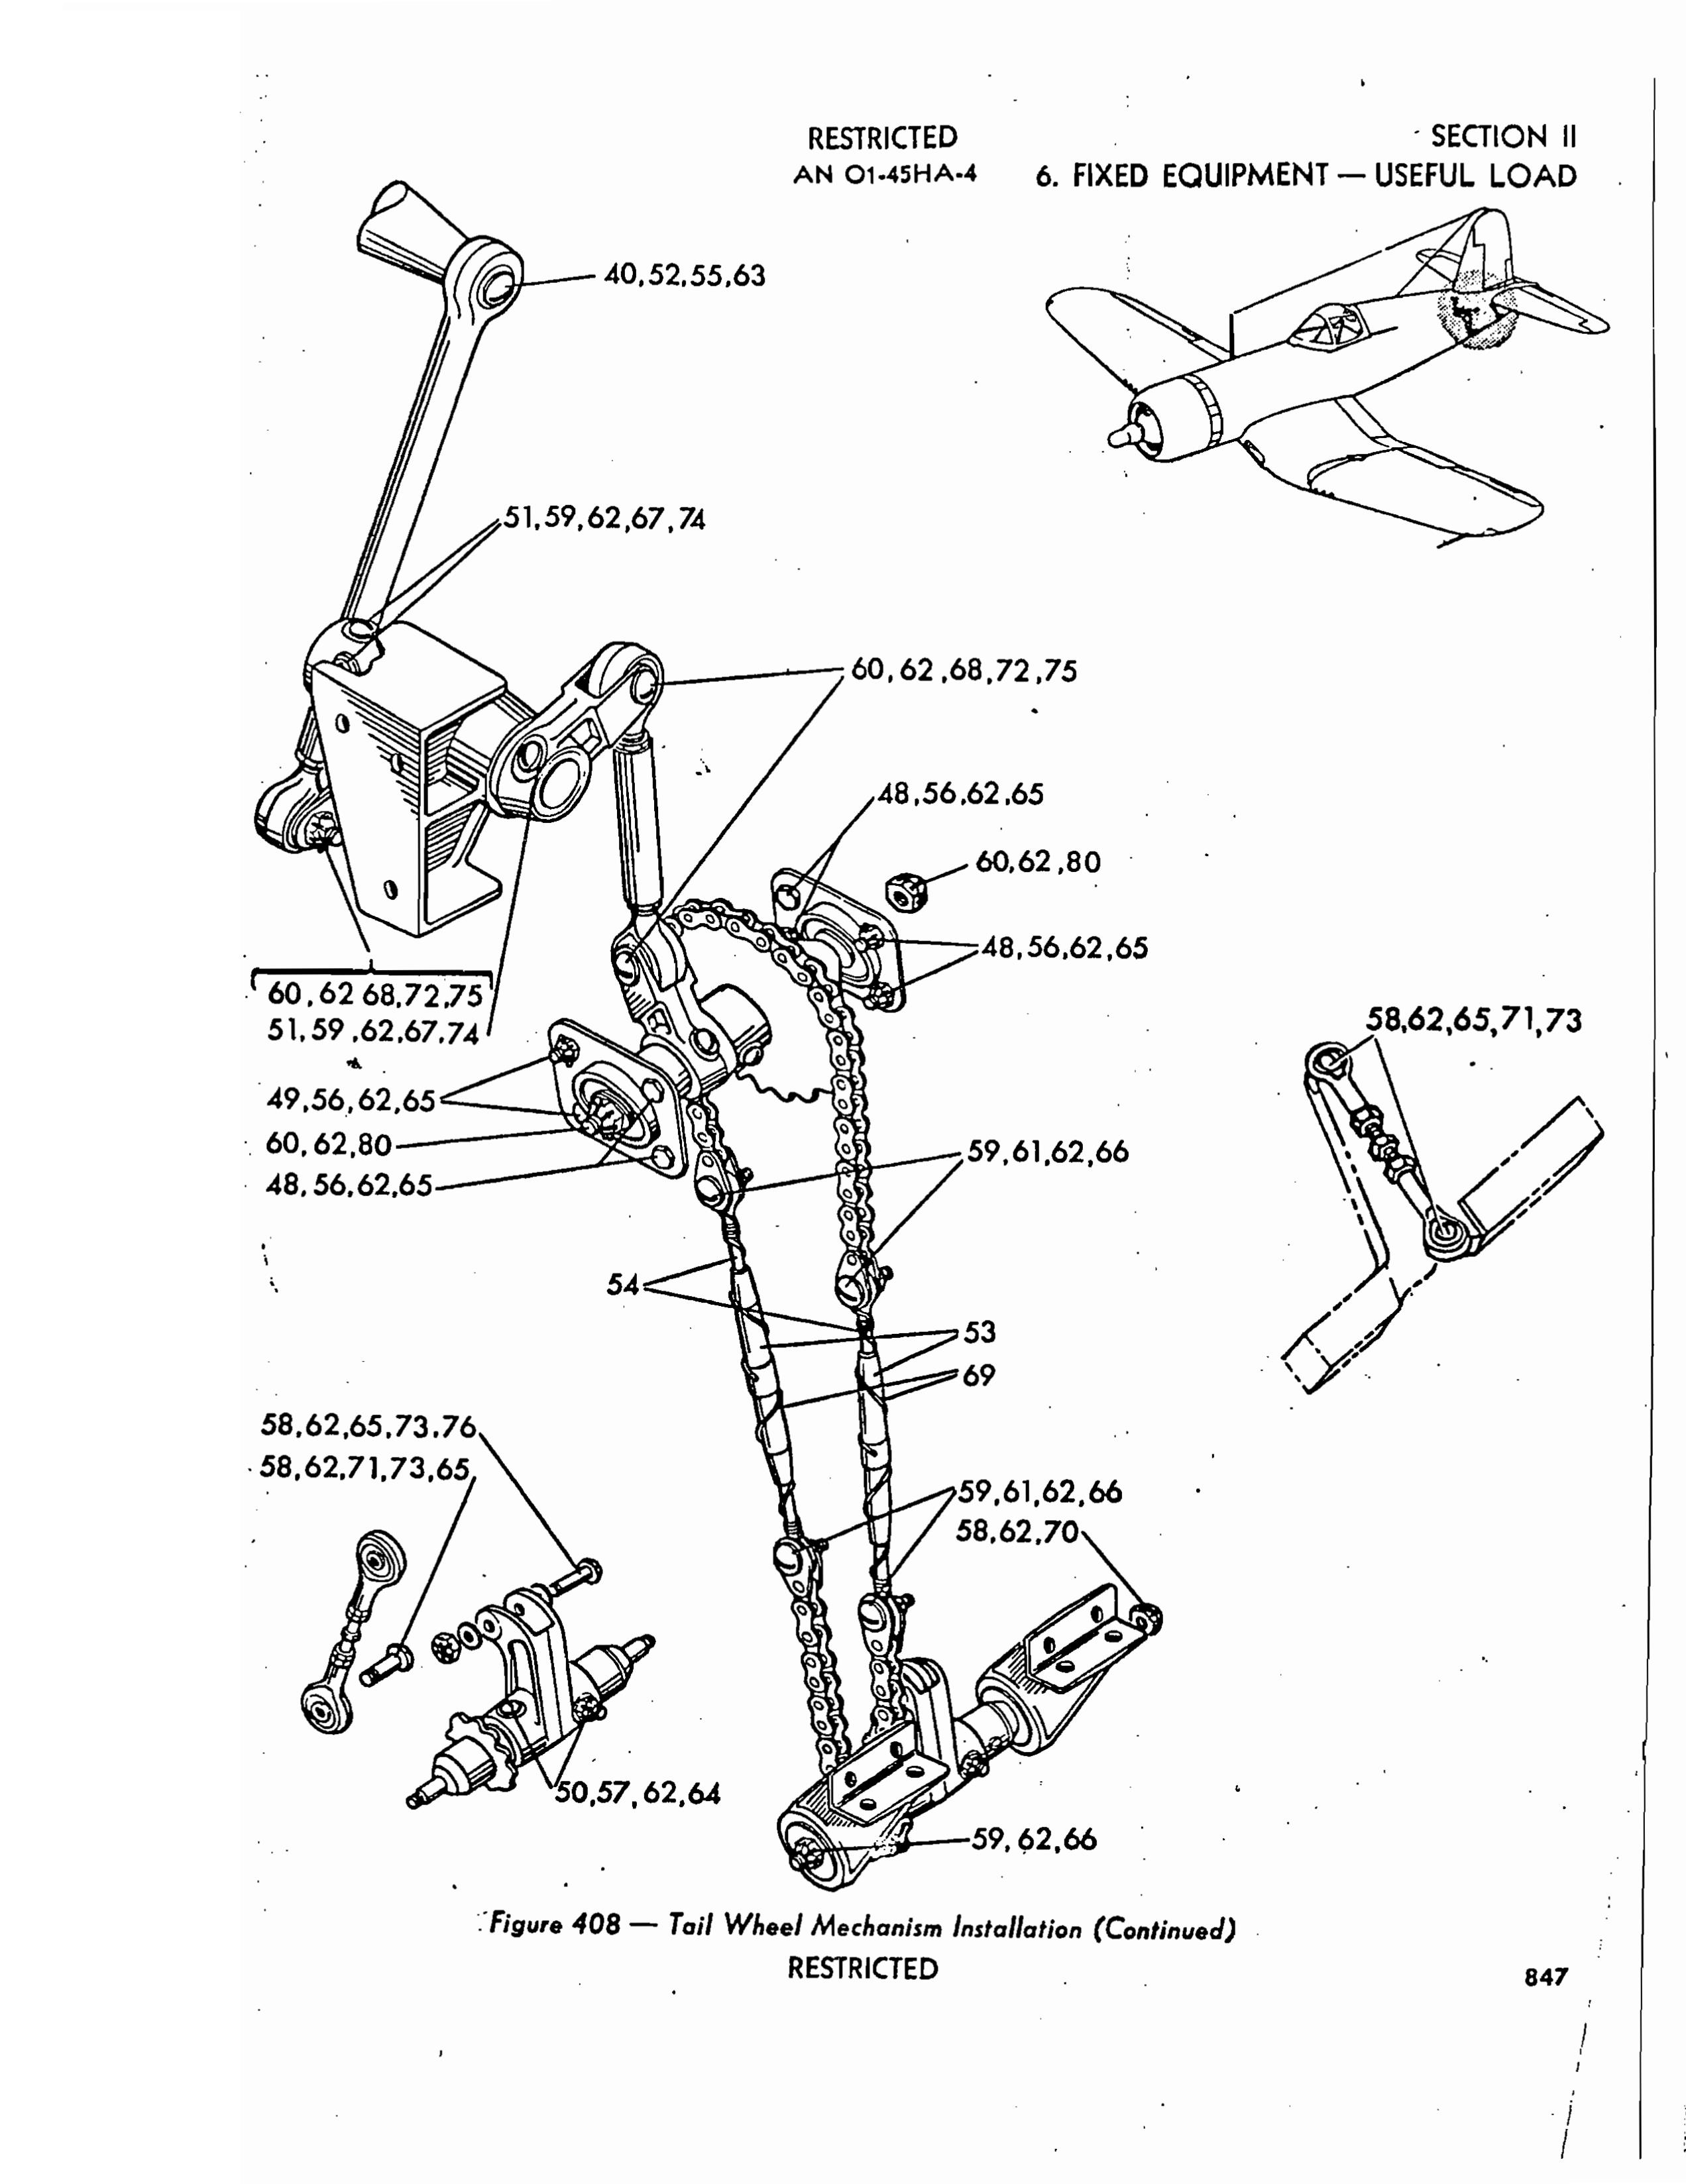 Sample page 878 from AirCorps Library document: Parts Catalog - Corsair